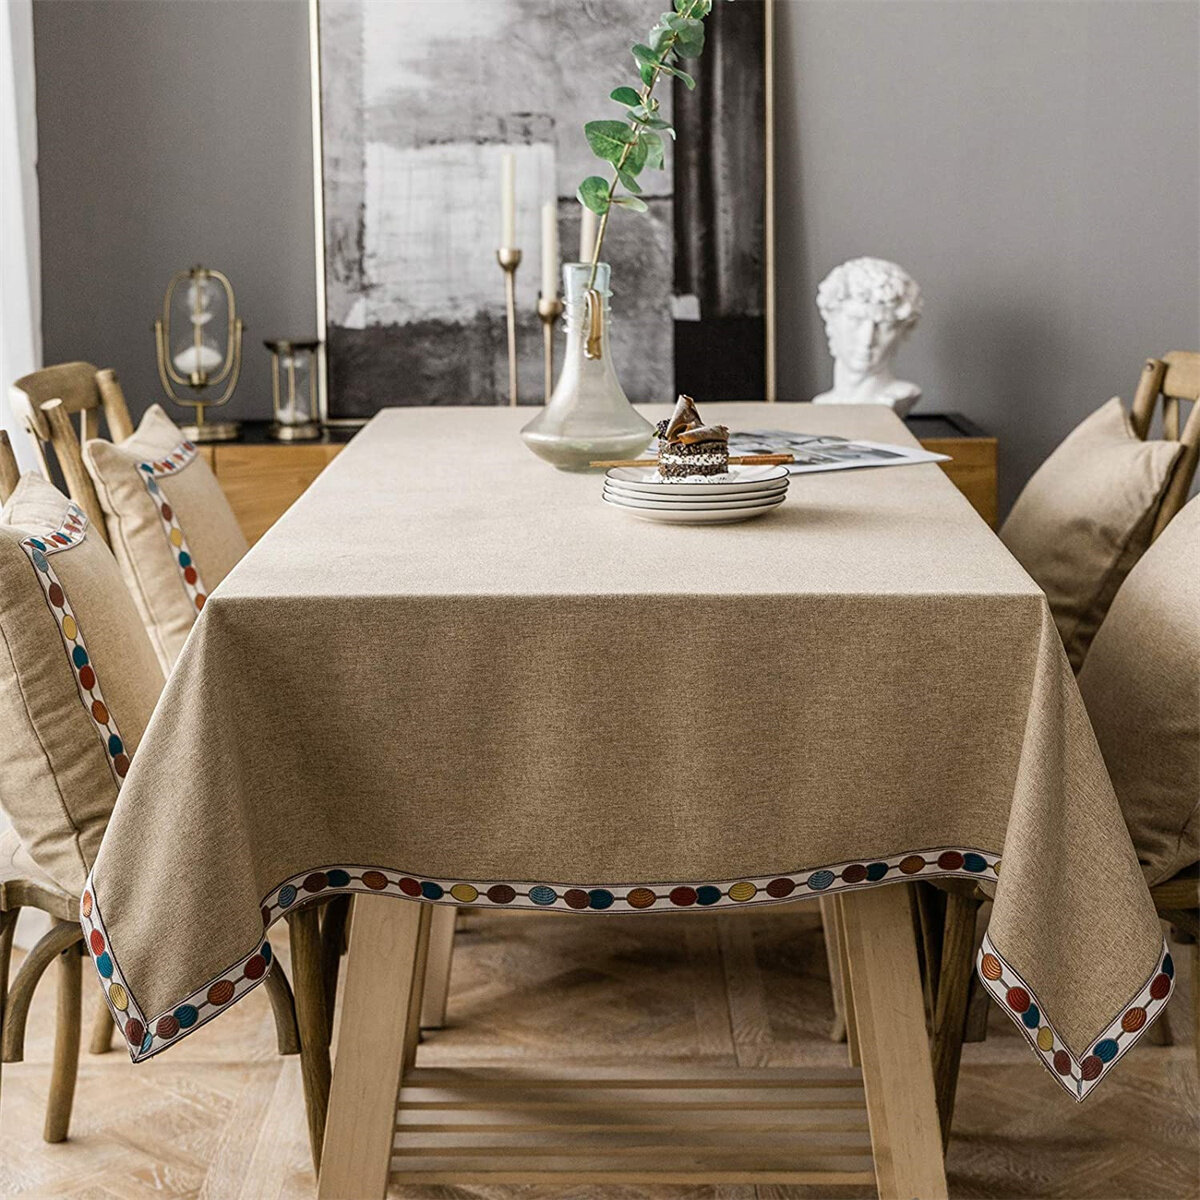 Heavy Duty Cotton Linen Tablecloth Oil Painting Cloth for Dining Table Cover